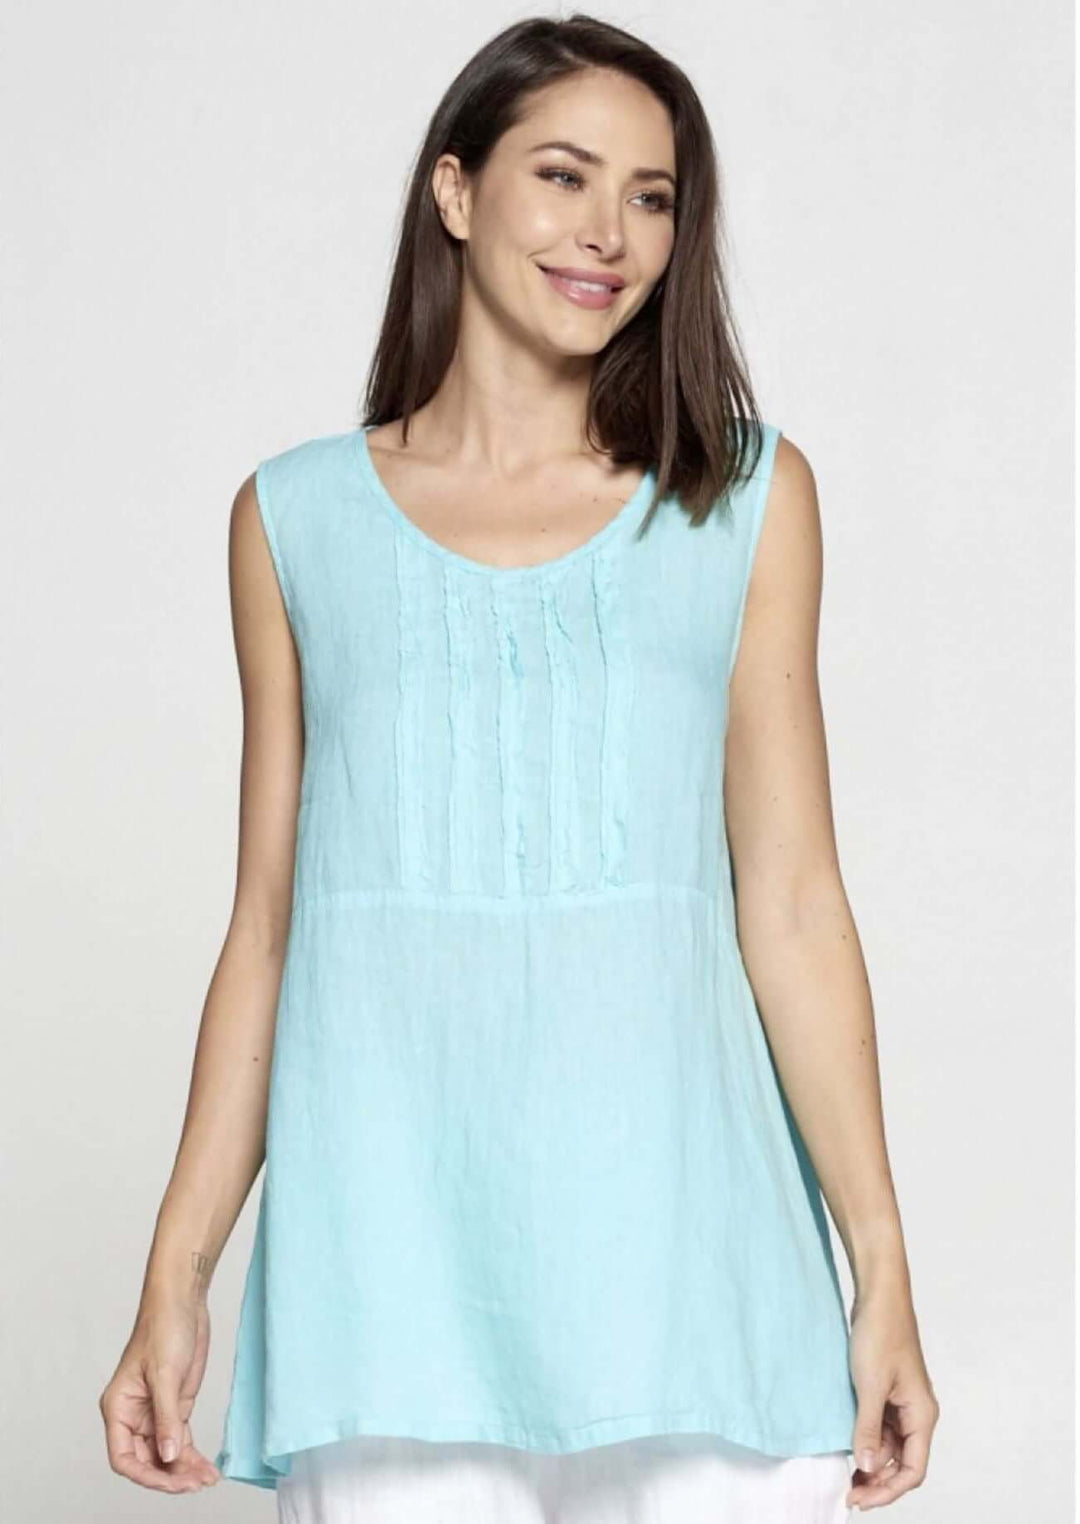 USA Made 100% Linen Ladies Sleeveless Aqua Blue Green Top with Frayed Detail & V-Neck | Match Point Style HLT704 | Classy Cozy Cool Women's Made in America Boutique